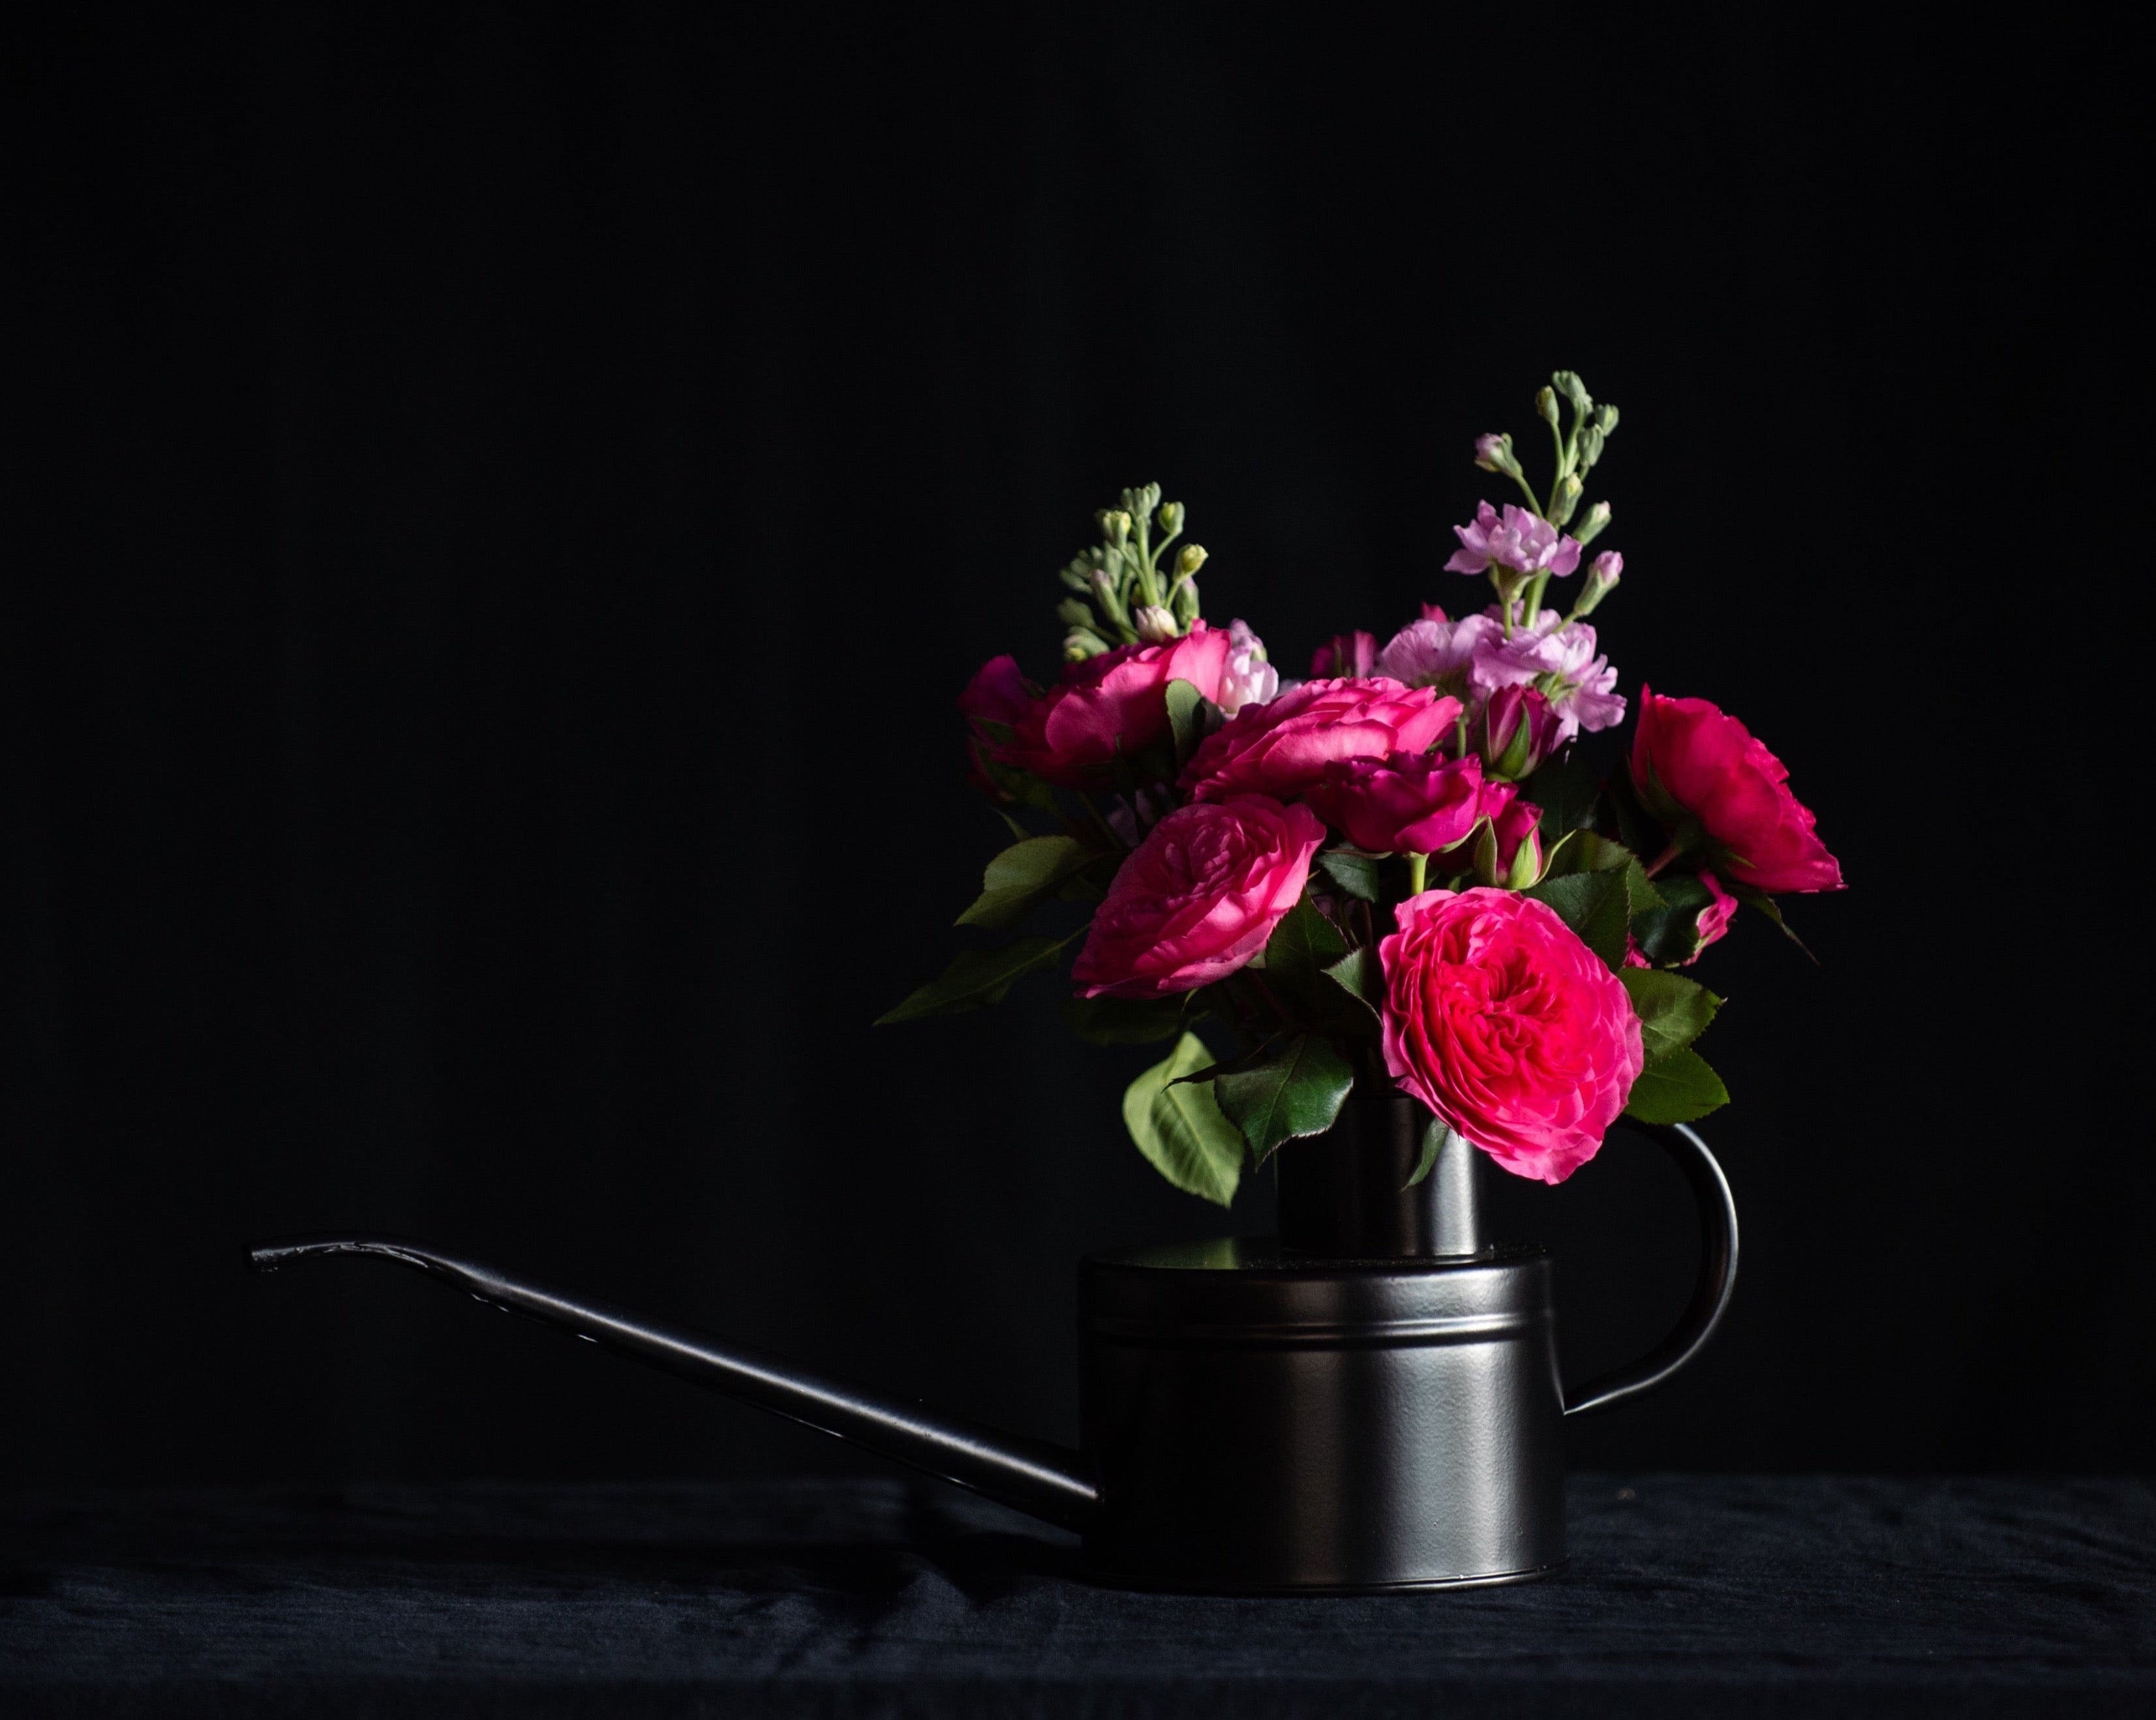 Valentines day flowers in a black watering can